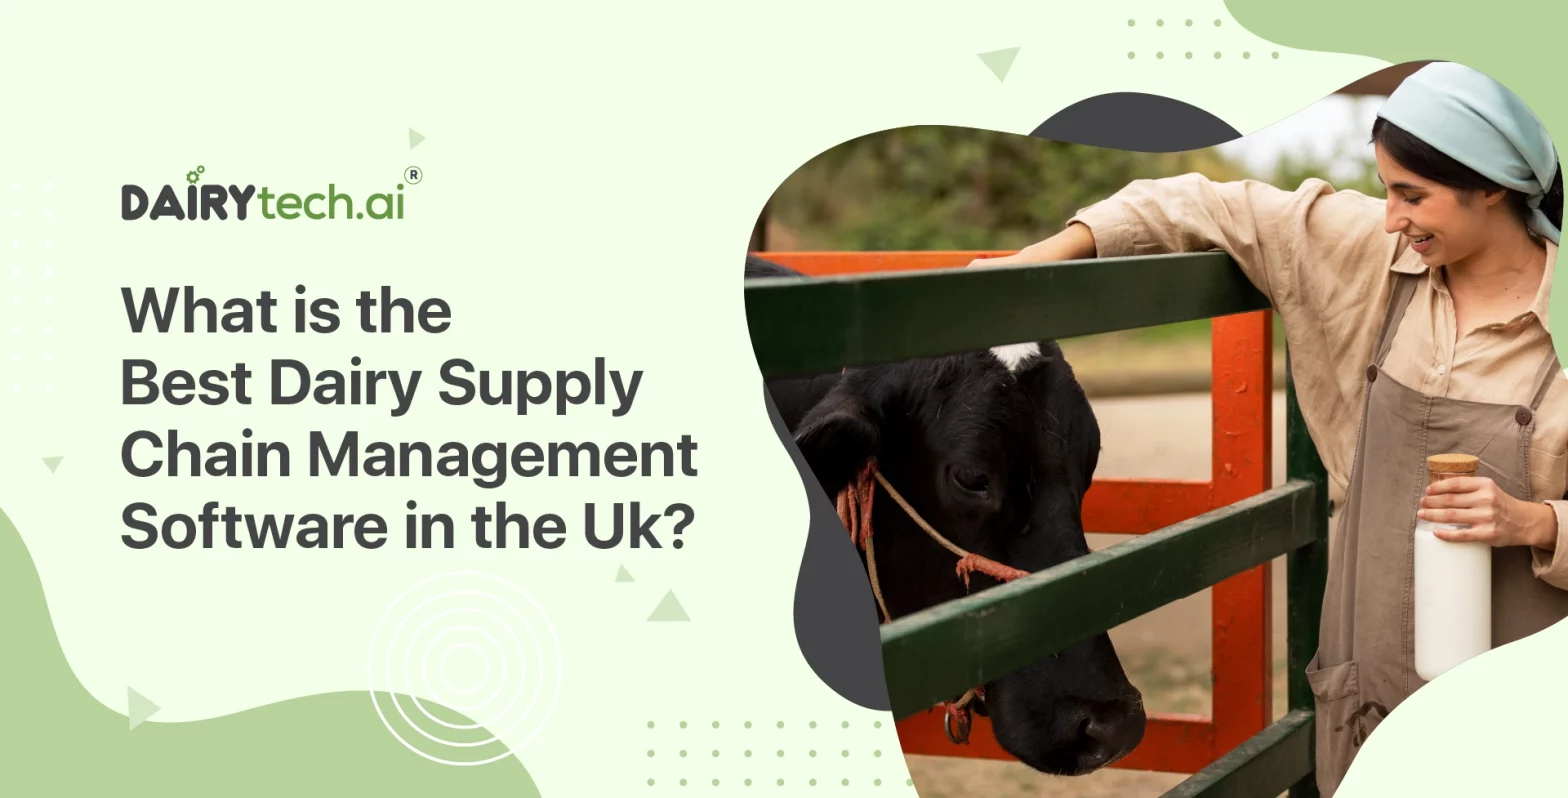 dairytechai-founded-by-ravi-garg-website-insights-what-is-the-best-supply-chain-management-software-in-the-uk